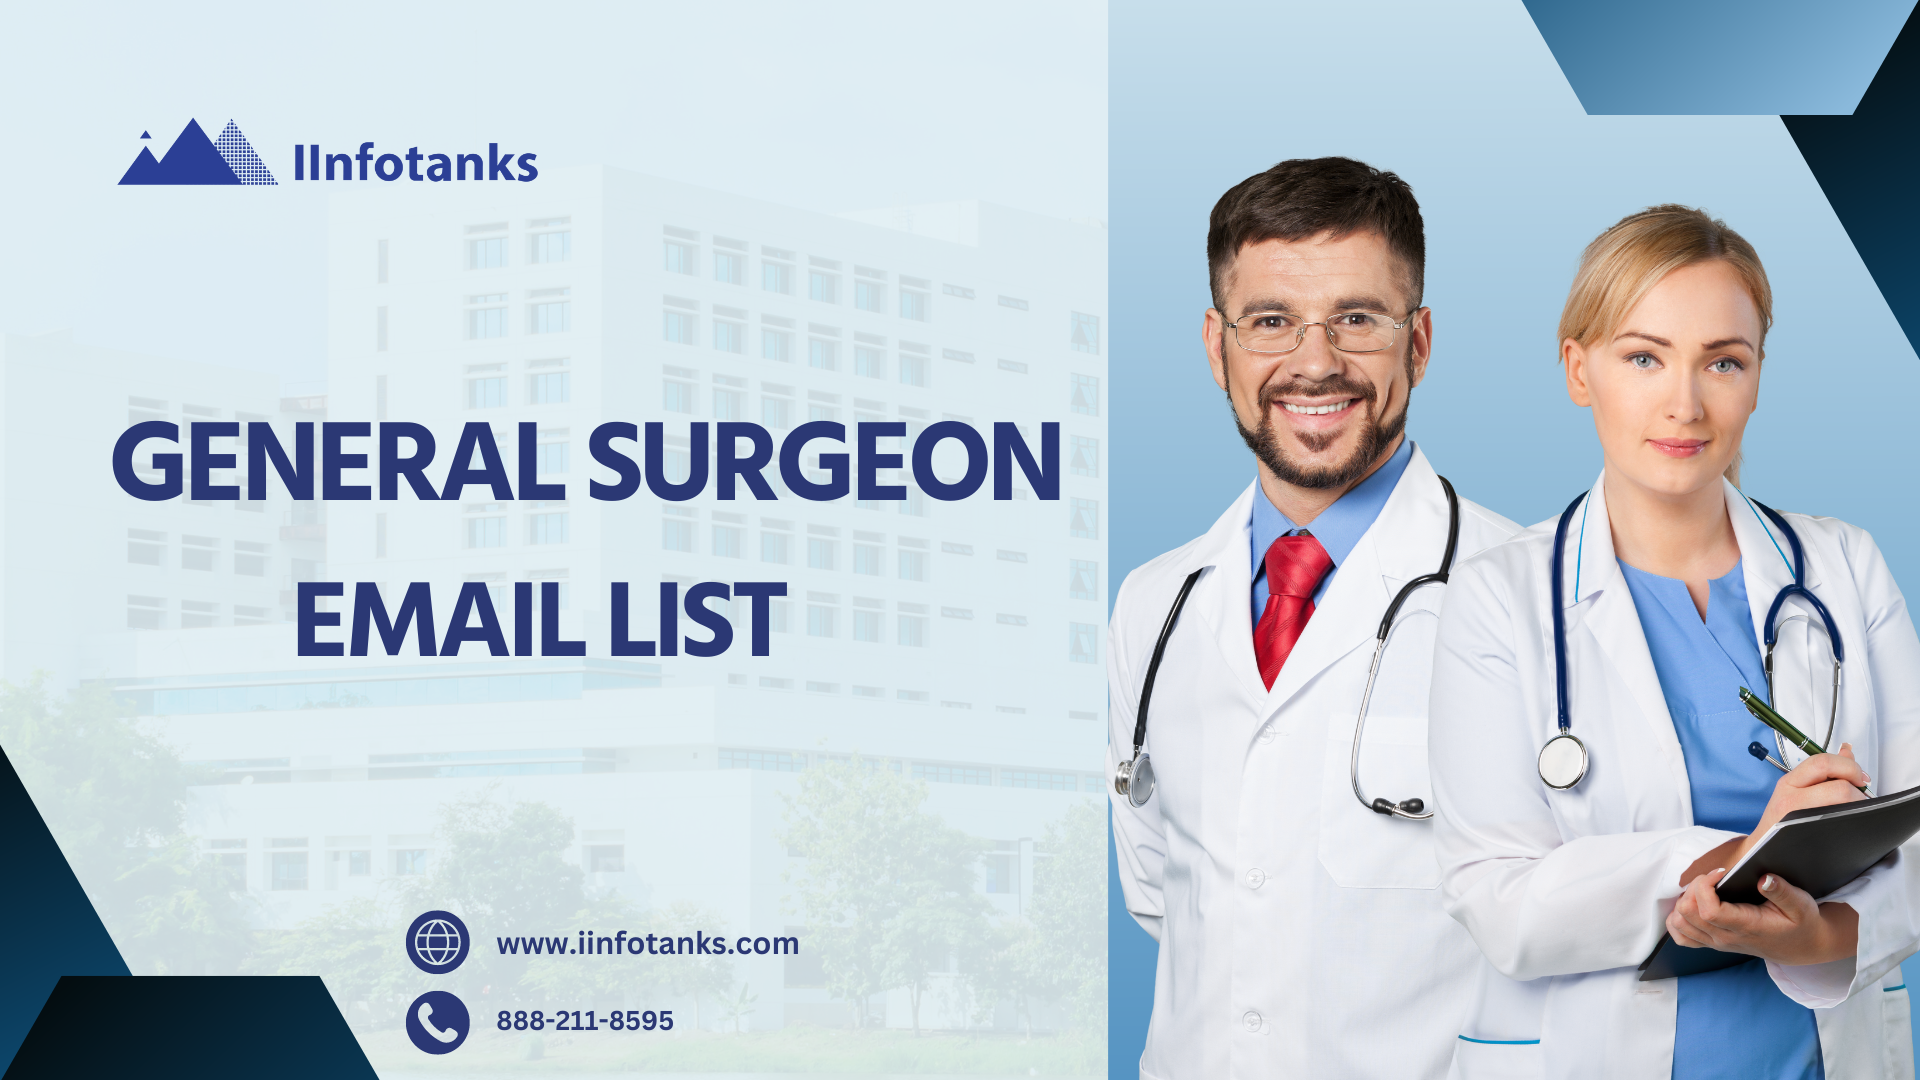 Finding the Best Email List of General Surgeons in the US